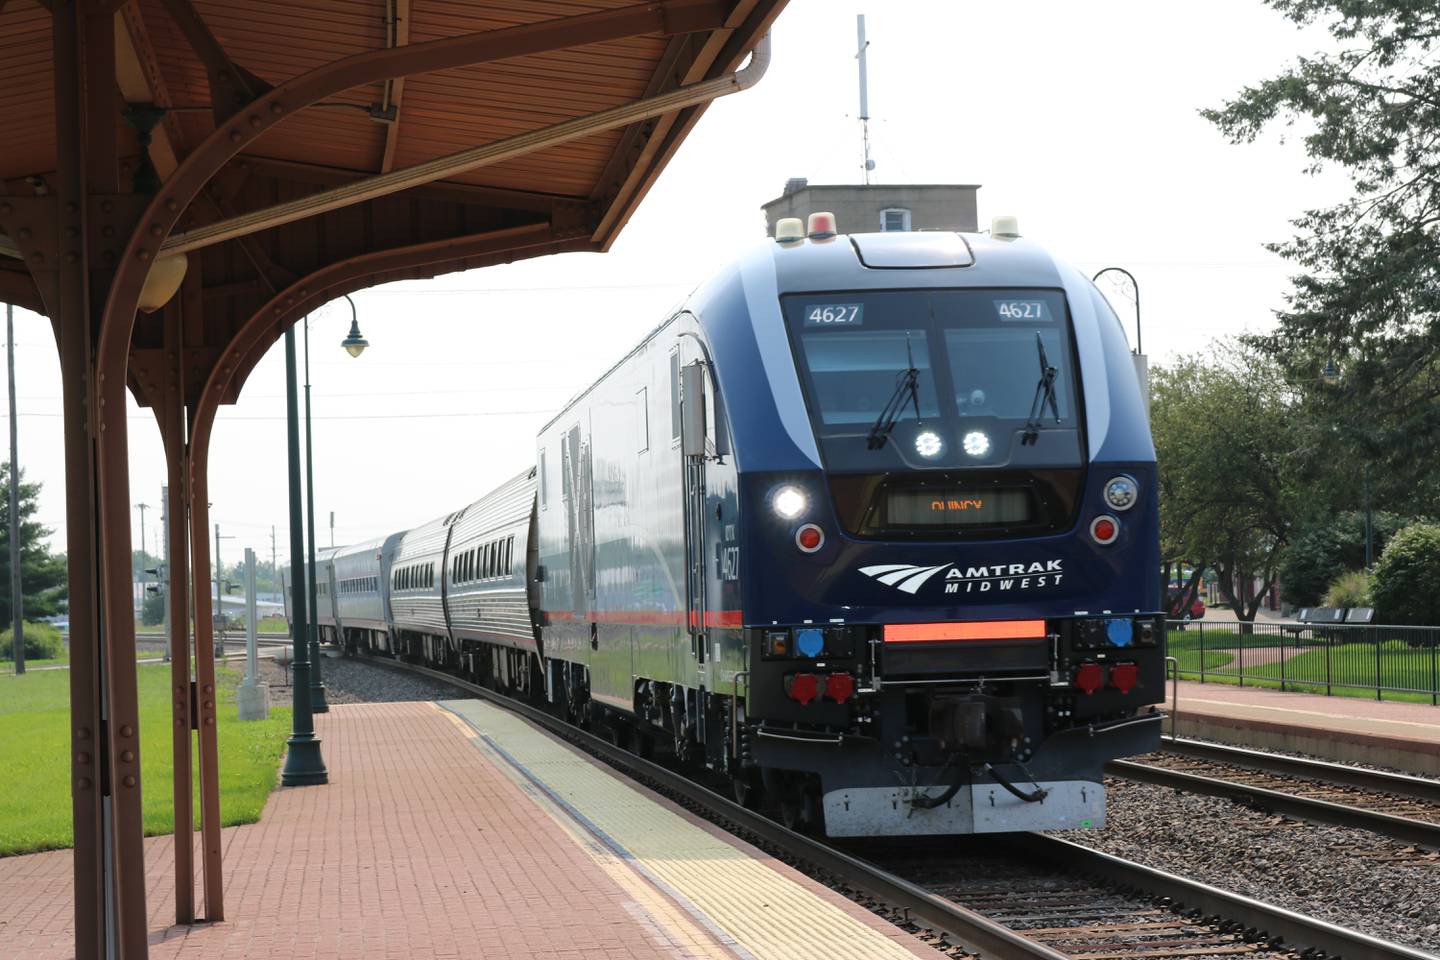 The Illinois Department of Transportation announced last week the state-supported Amtrak passenger trains on the Lincoln Service, Carl Sandburg/Illinois Zephyr and Illini/Saluki lines could resume full service. This includes the stops in Mendota and Princeton, which are on the Illinois Zephyr line. Mark Robinson of Walnut submitted this photo of the Carl Sandburg train returning to Princeton at 9:38 a.m. on Monday,  July 19. Robinson said, "I along with others are happy that the train has returned.  My family plans to use often between Princeton and Plano."